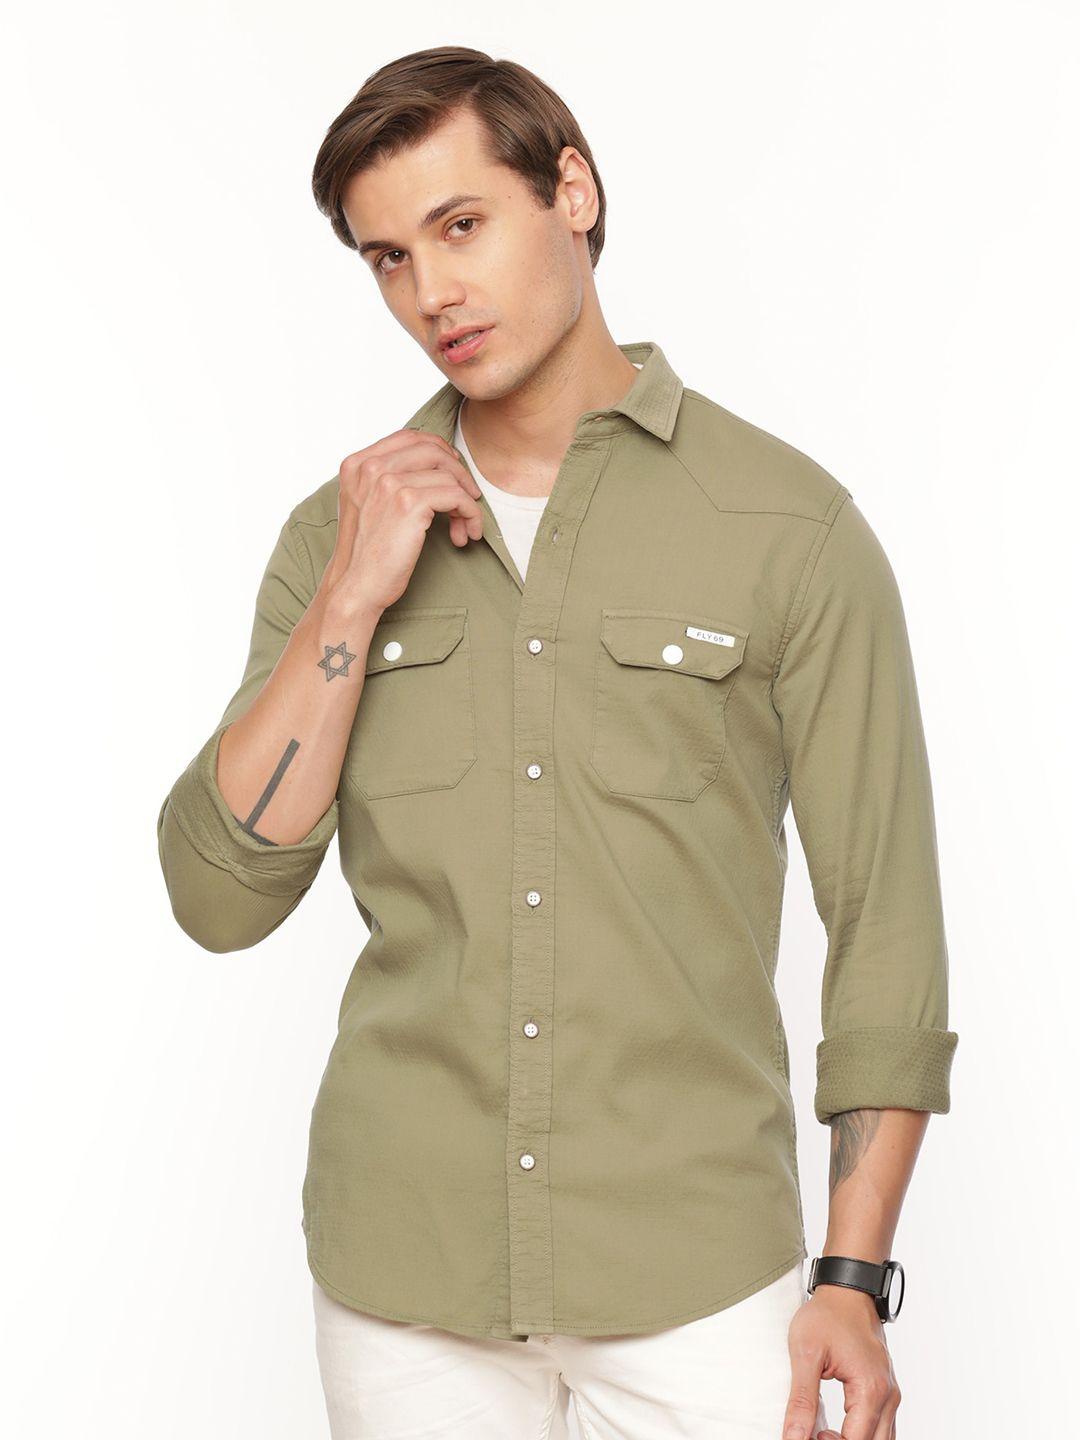 fly 69 premium slim fit casual pure cotton shirt